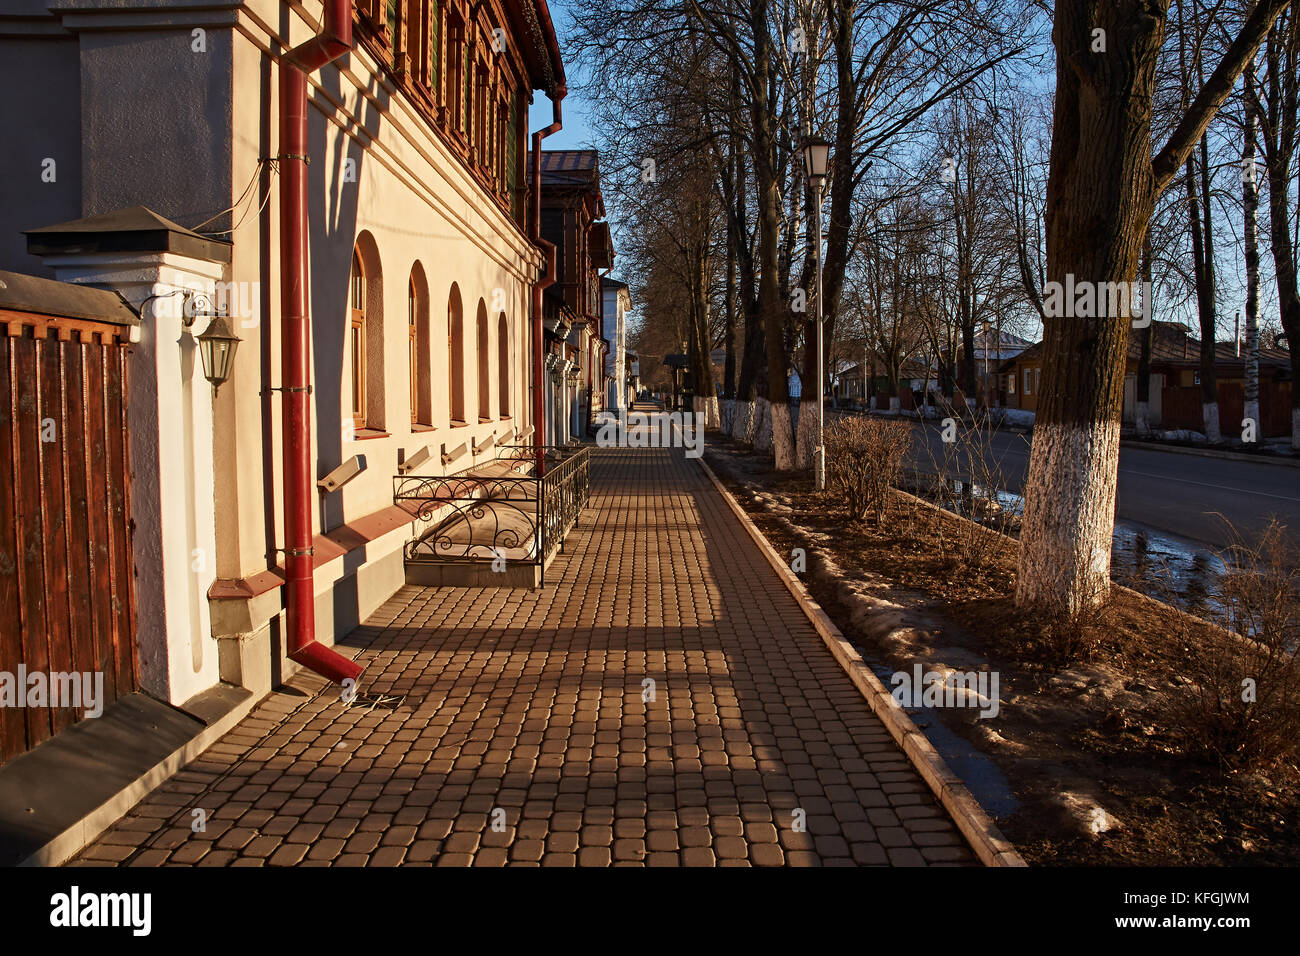 Low-rise buildings, The pavement is covered with tiles. The road is covered with asphalt. Between the road and the sidewalk grow trees.Suzdal.Golden Stock Photo